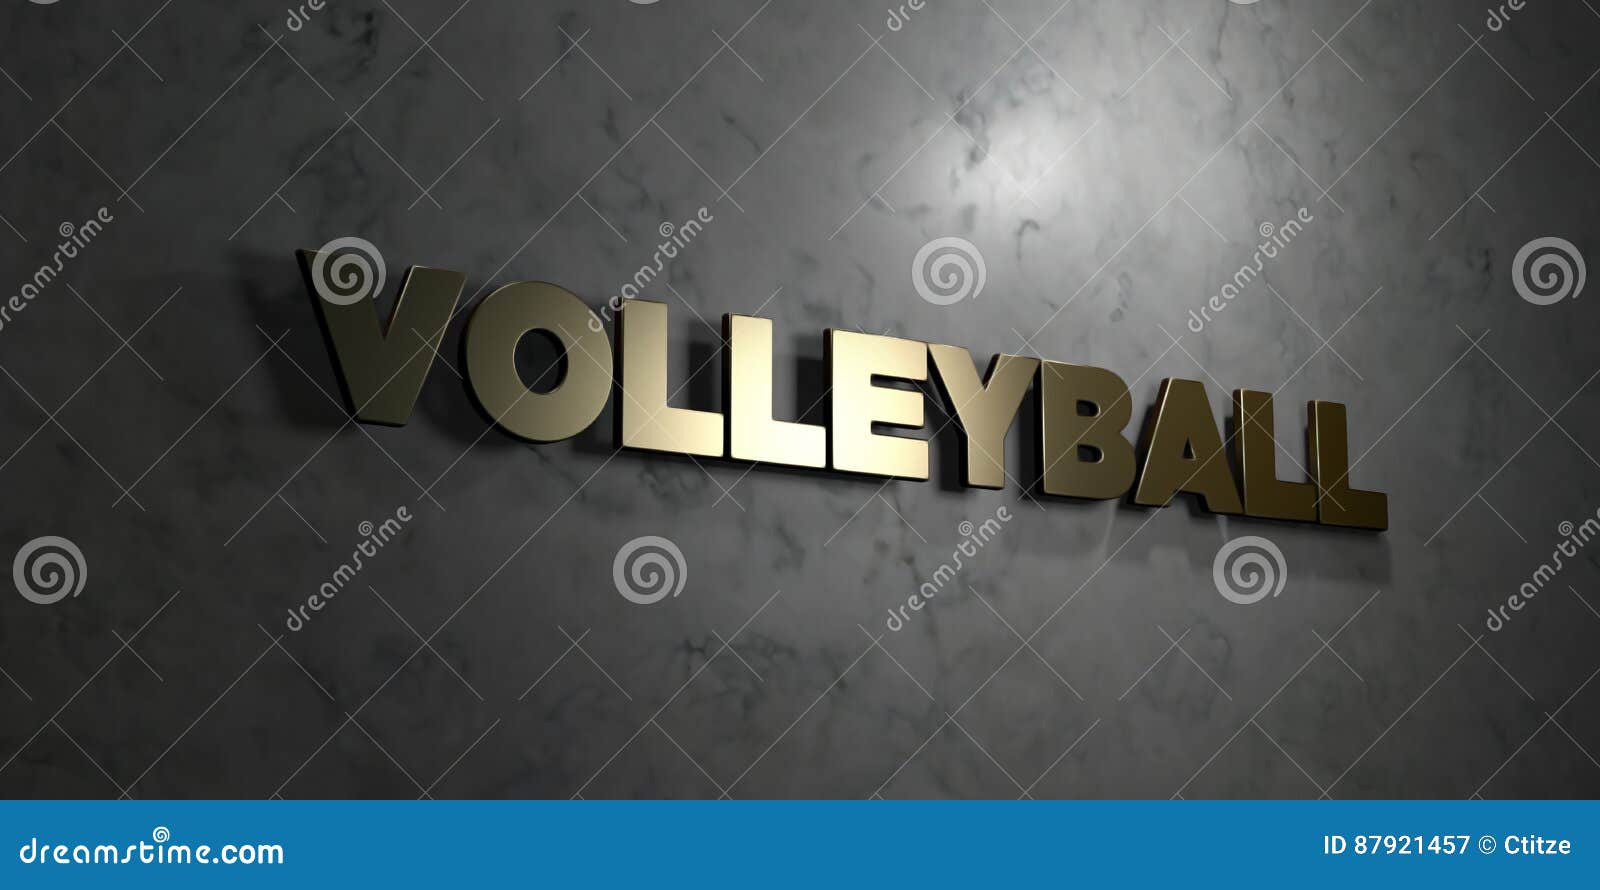 Volleyball - Gold Text on Black Background - 3D Rendered Royalty Free Stock Picture Stock Illustration